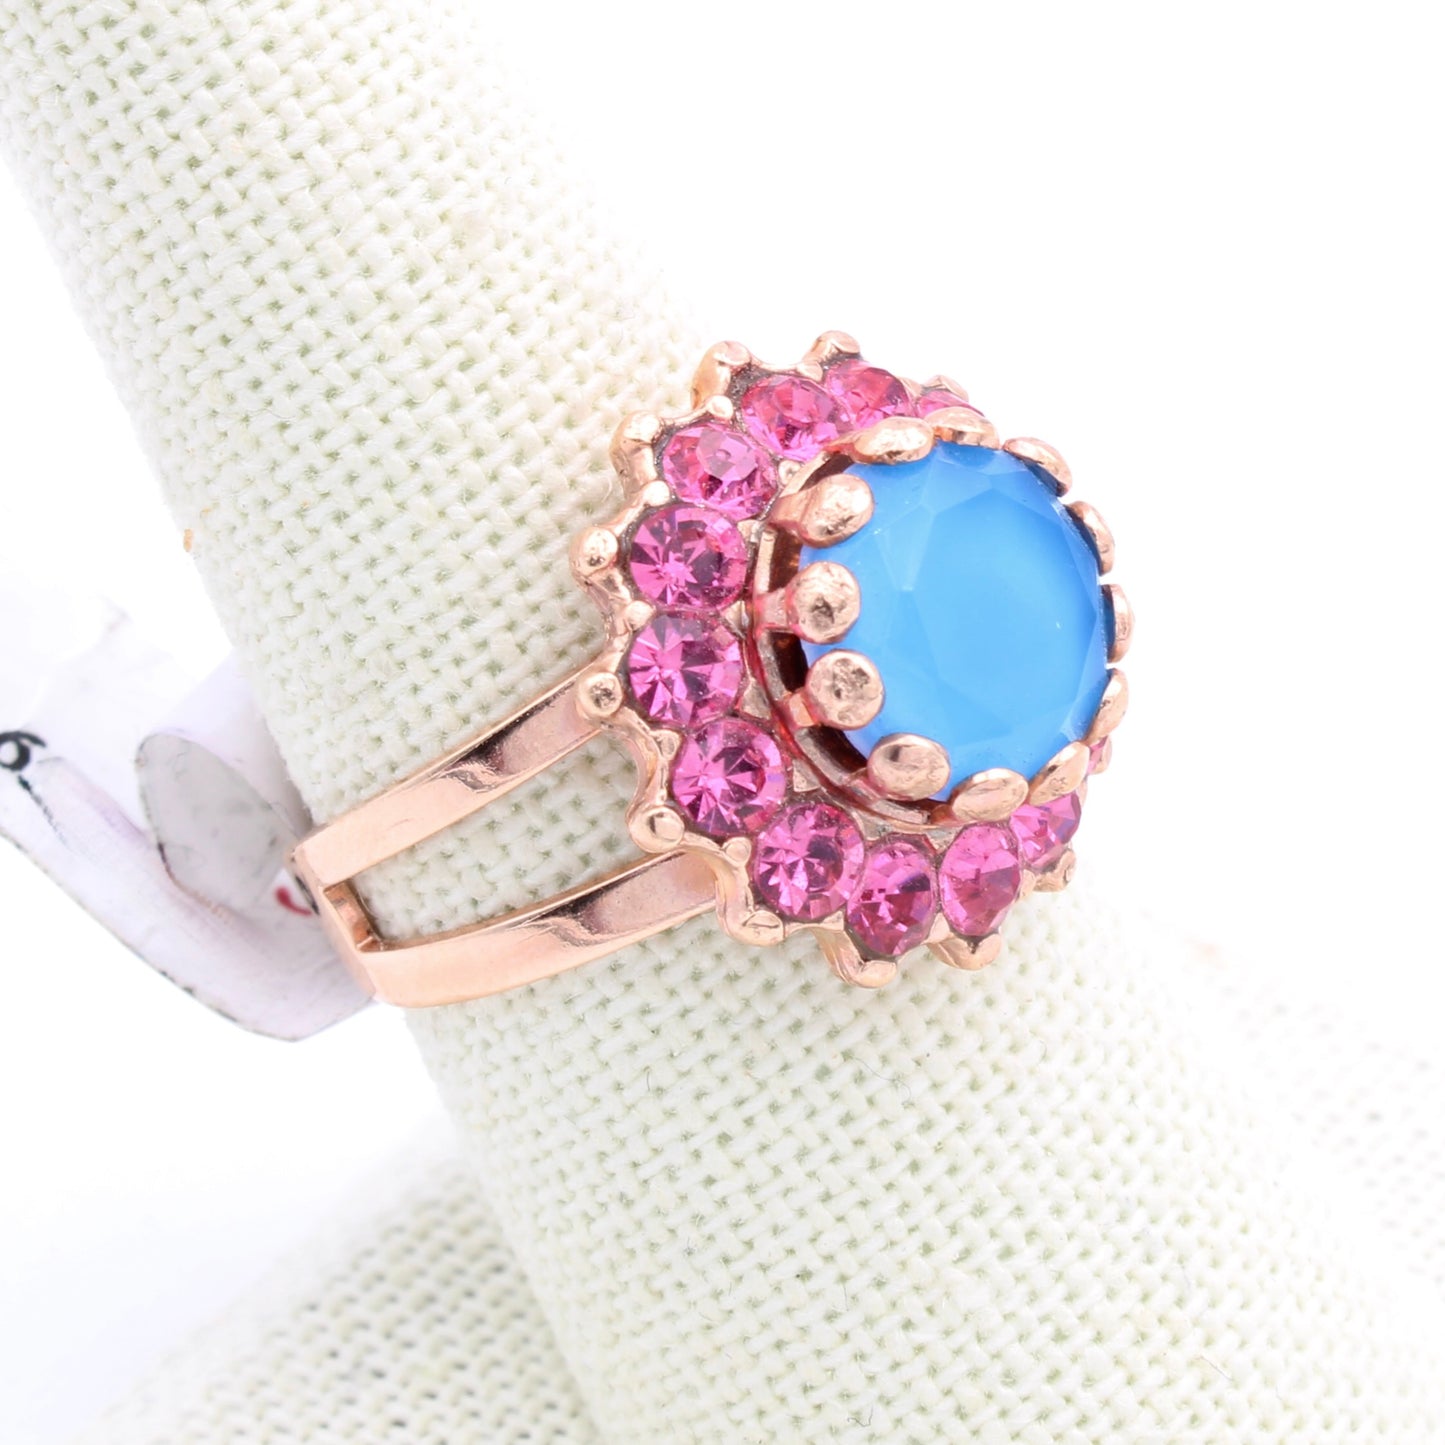 Spring Flowers Collection Adjustable Rosette Ring in Rose Gold